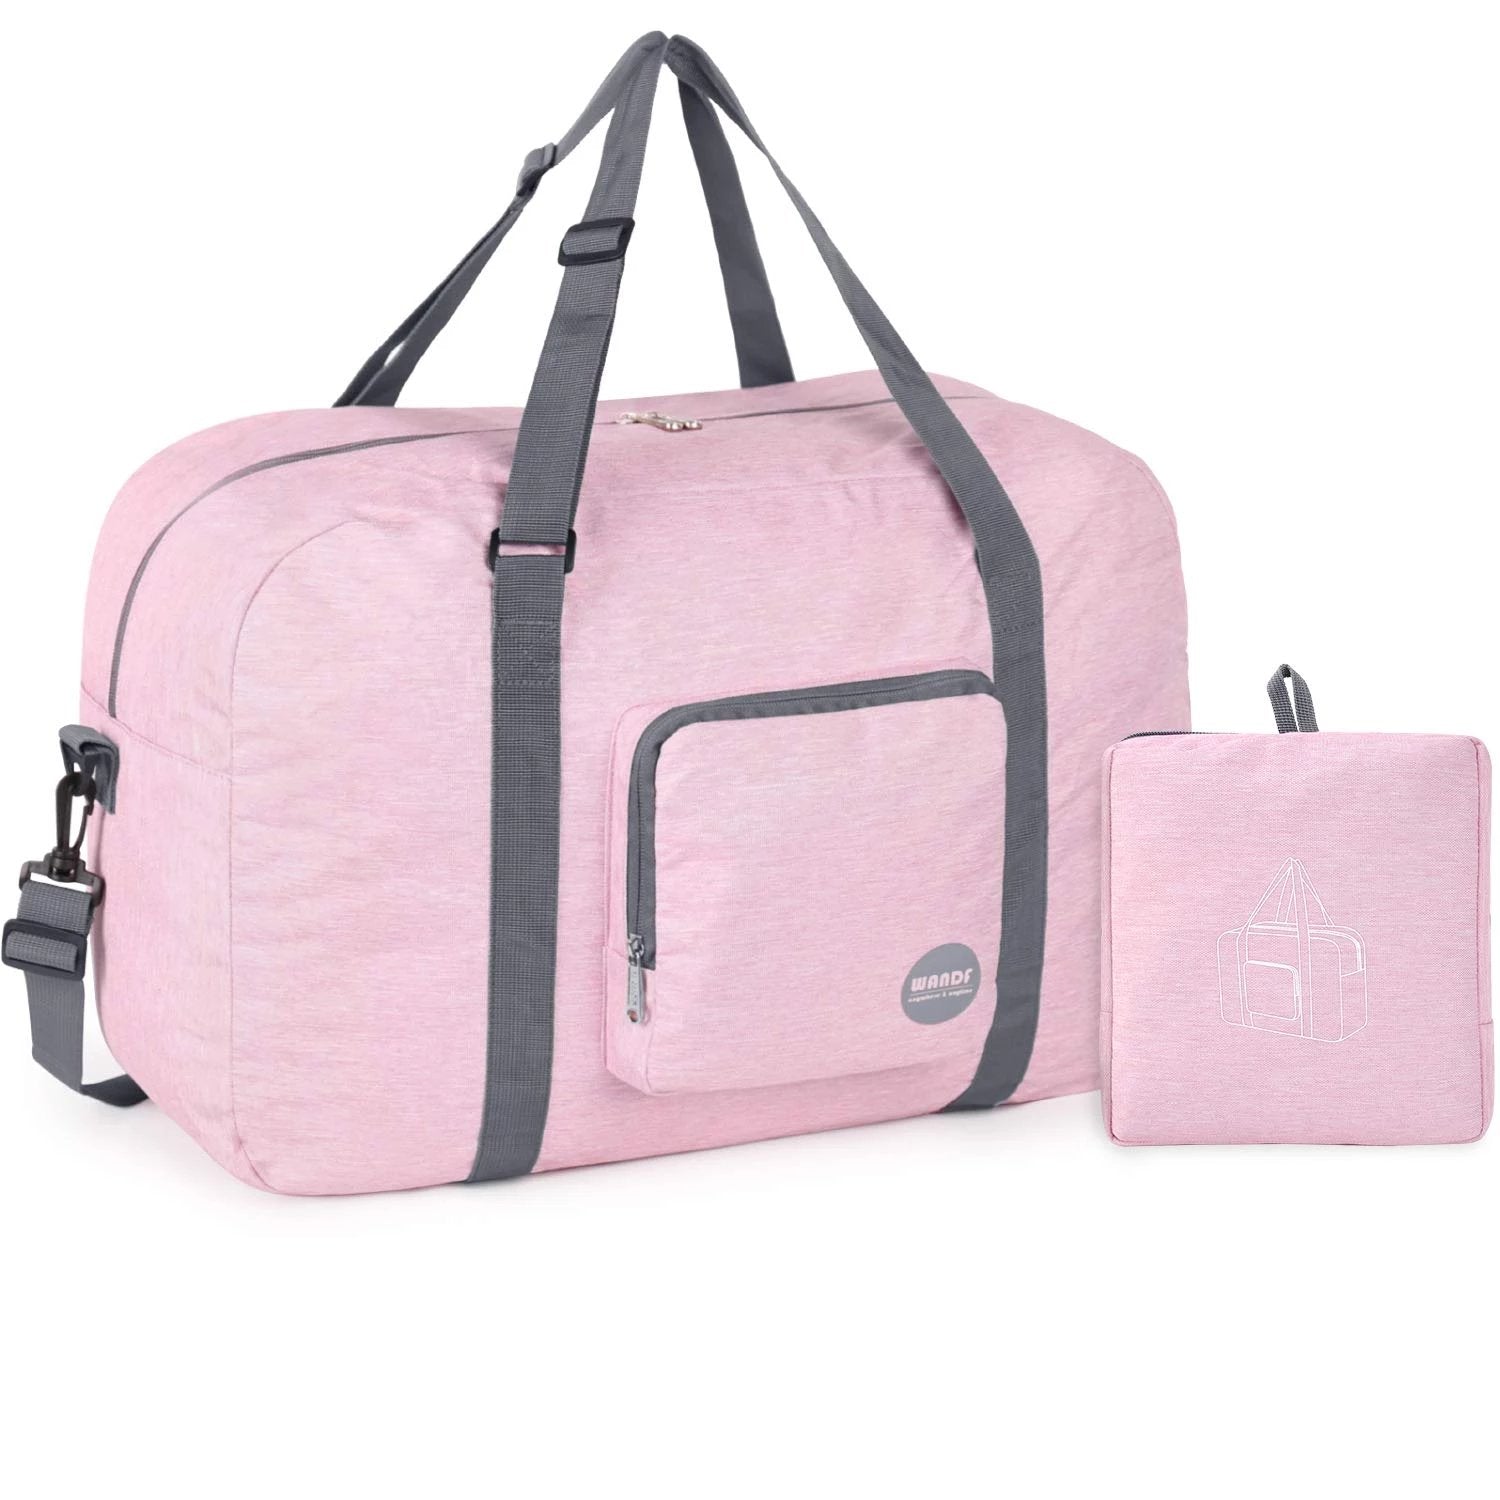 BRÜUN Large Size Duffel Bag with Protective Cover – A Pink Colored